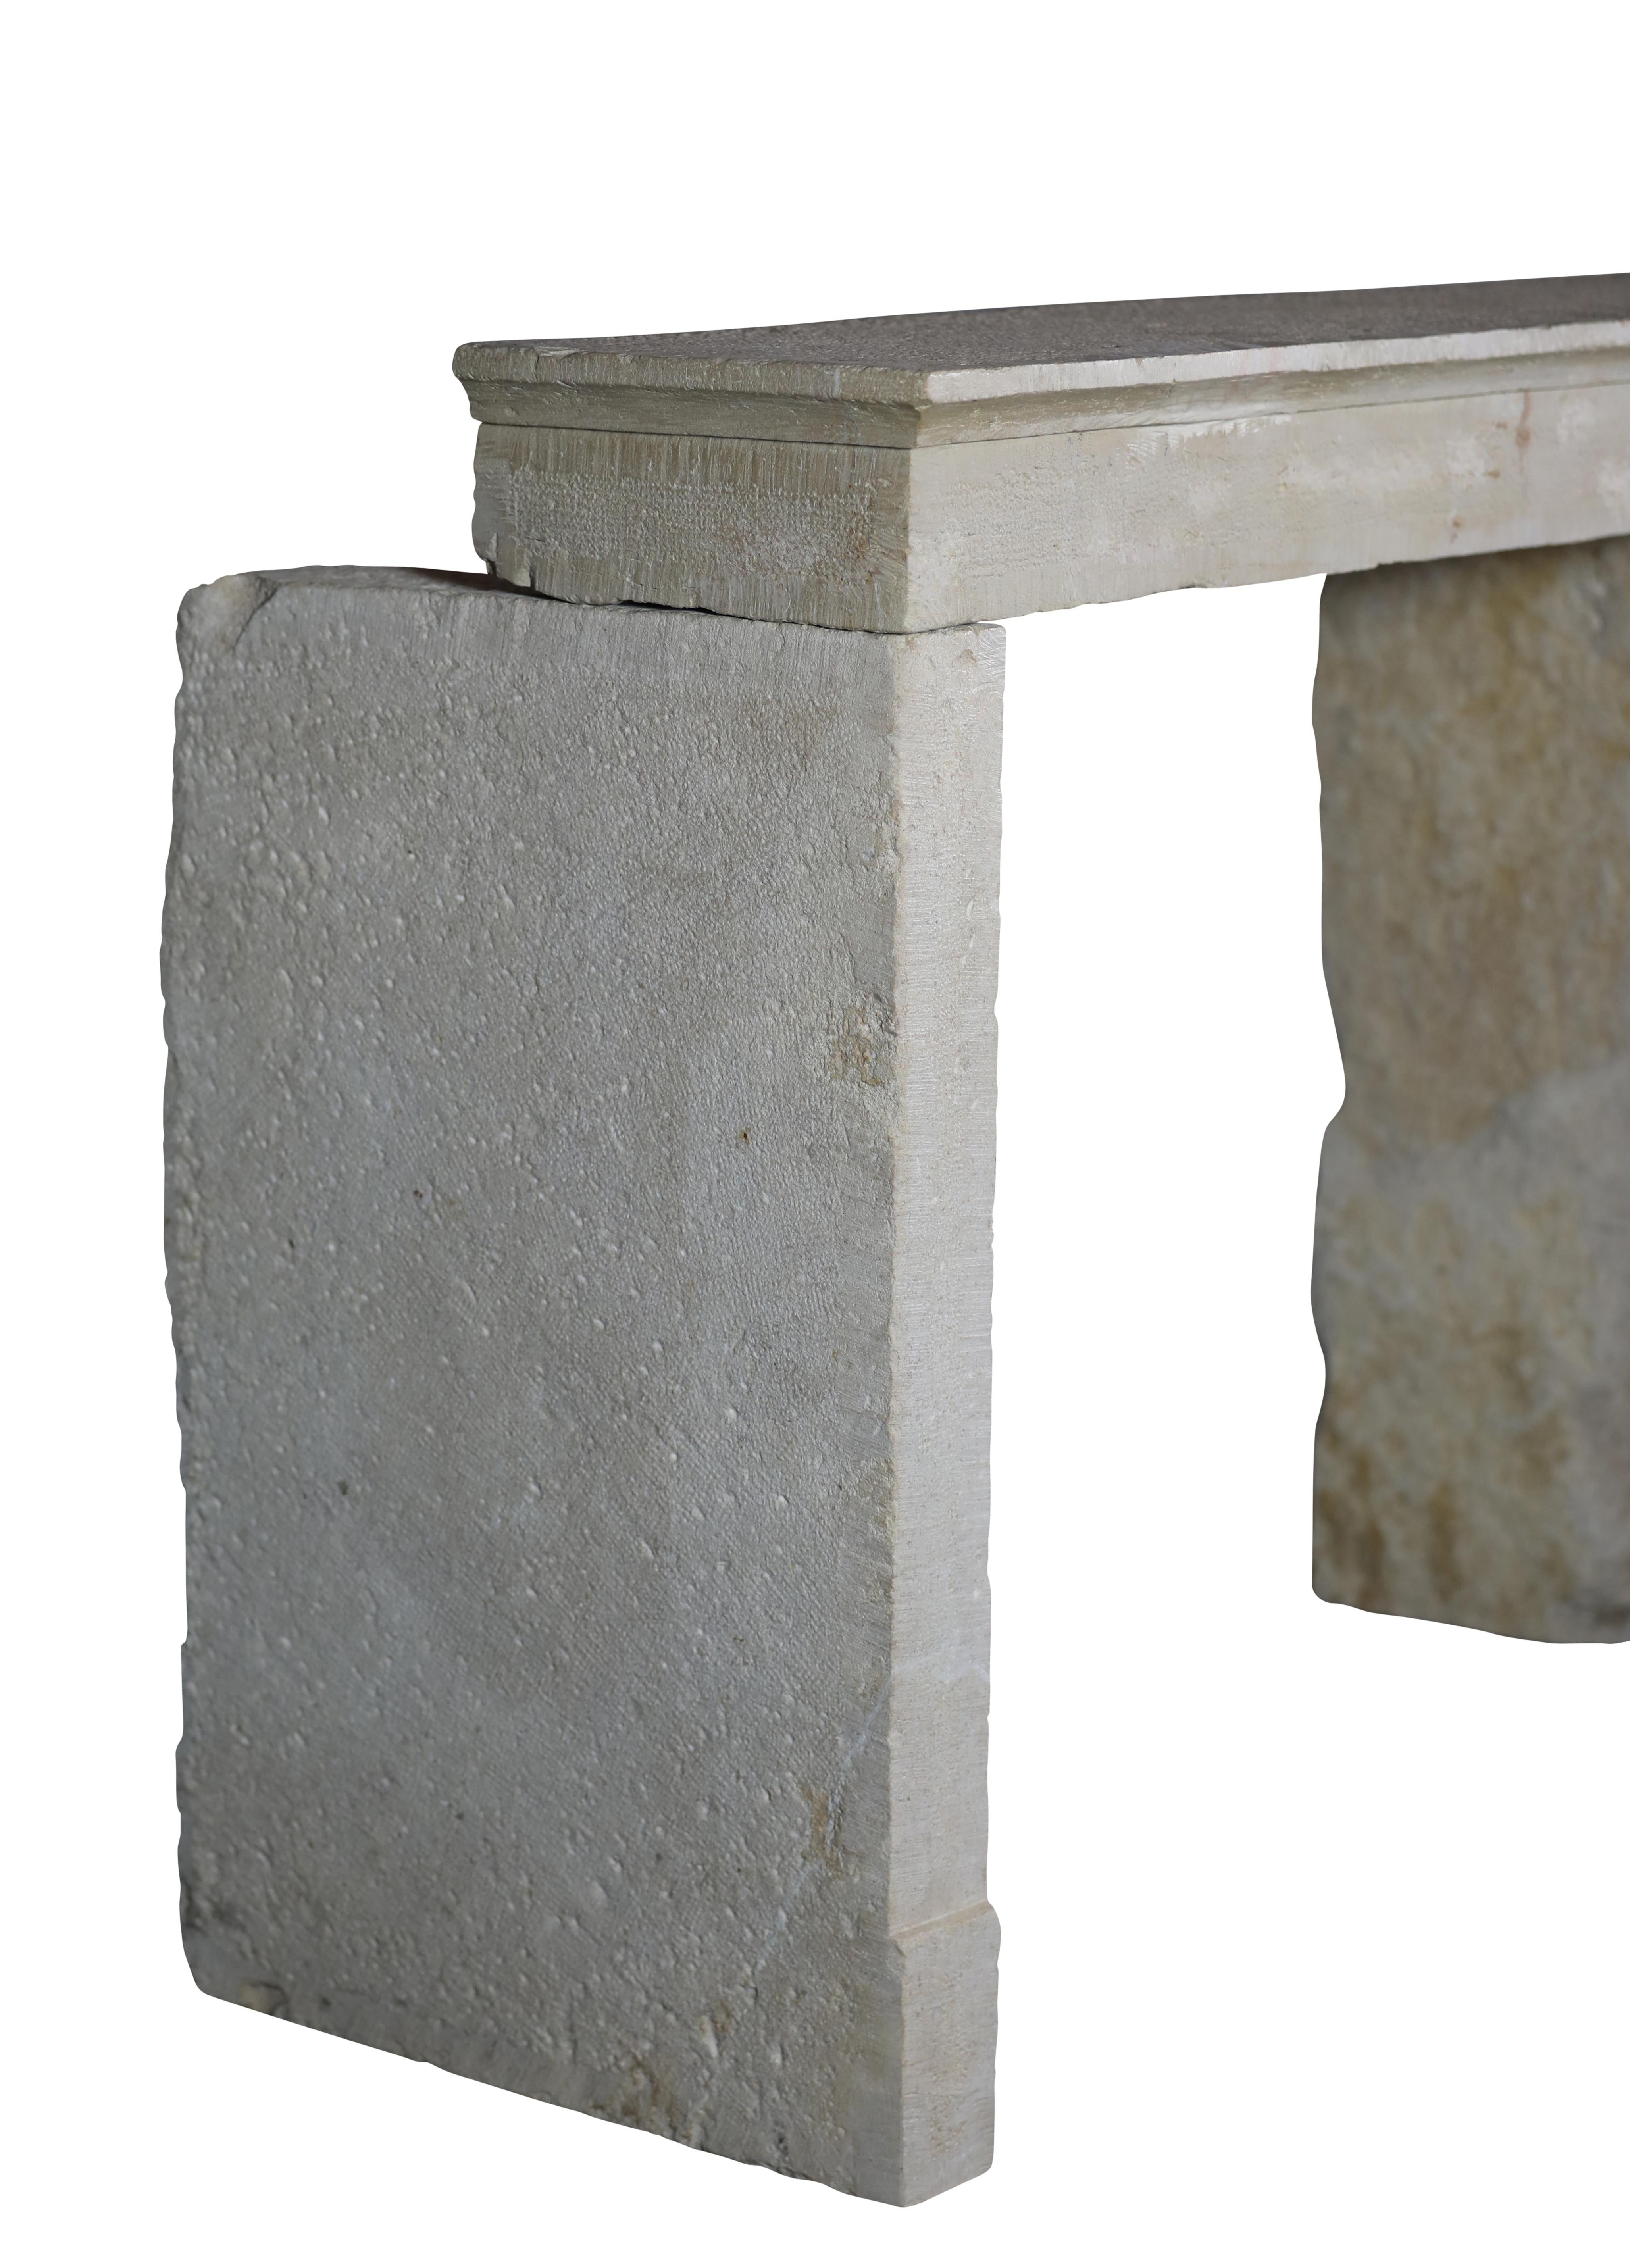 Timeless French Beige Reclaimed Limestone Fireplace Surround For Sale 5